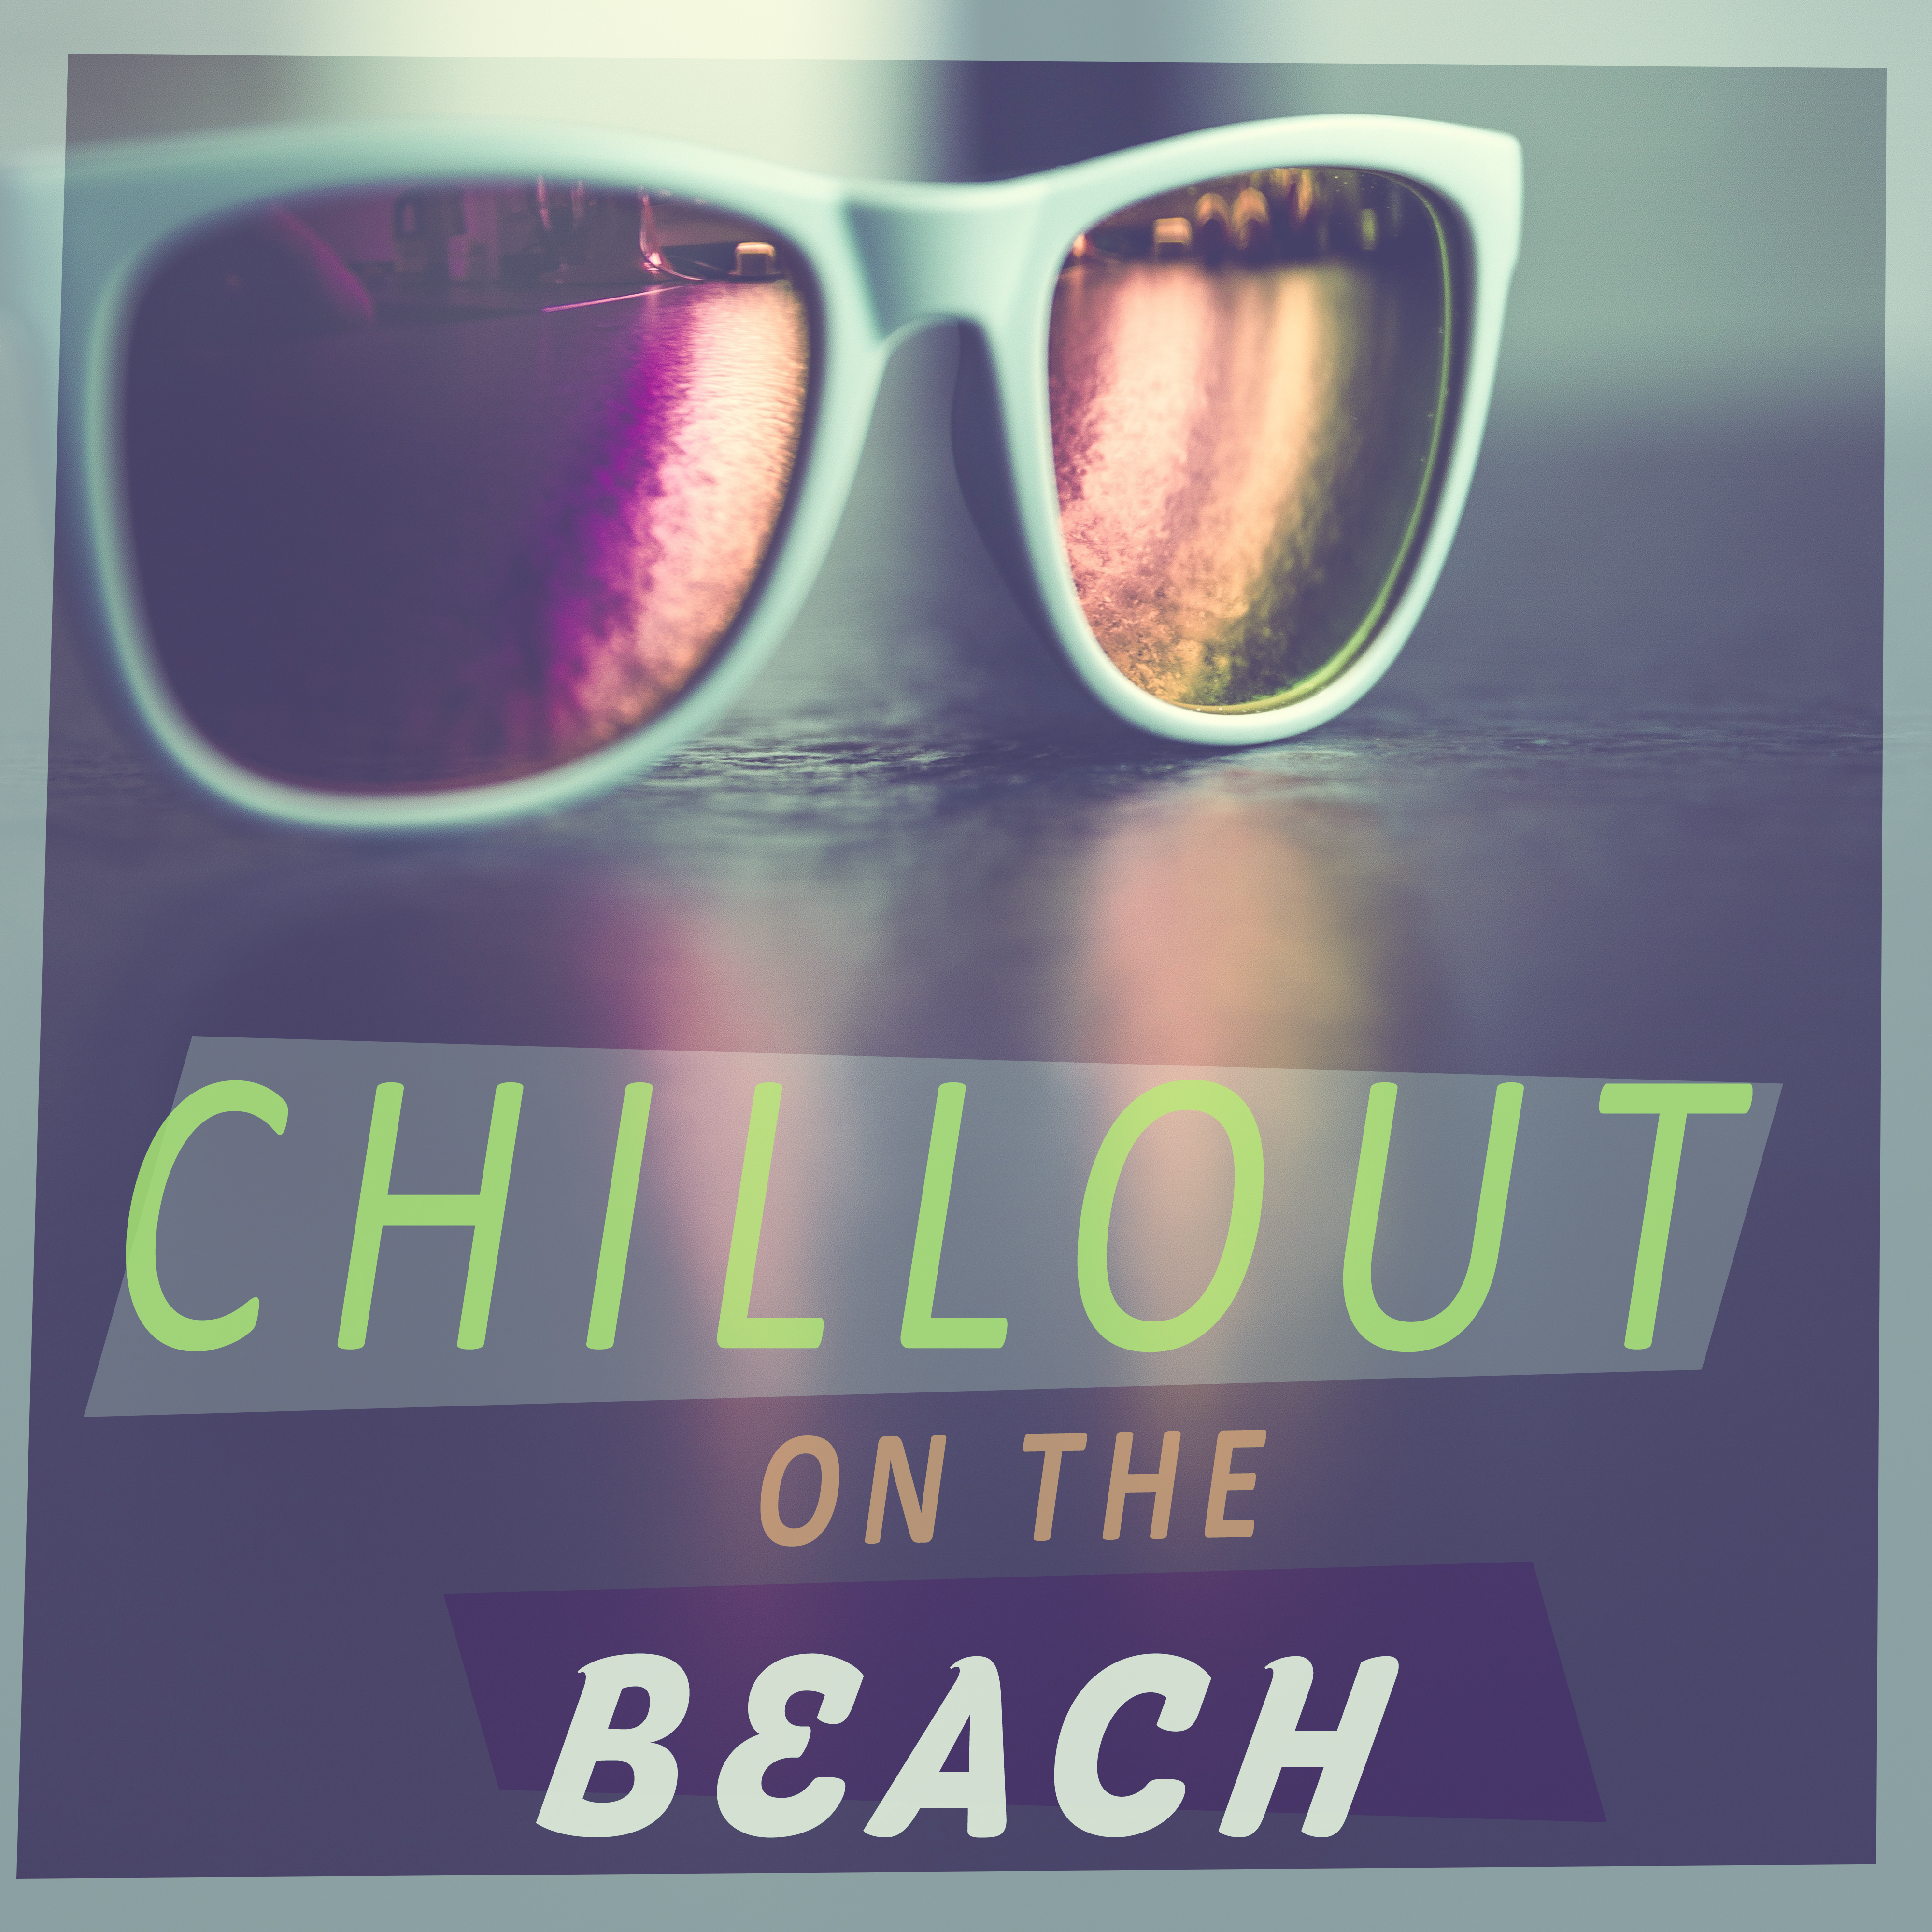 Chillout On the Beach – Beach Relaxation, Hot Summer Music, Chill Out Sounds to Relax, Calm Your Mind